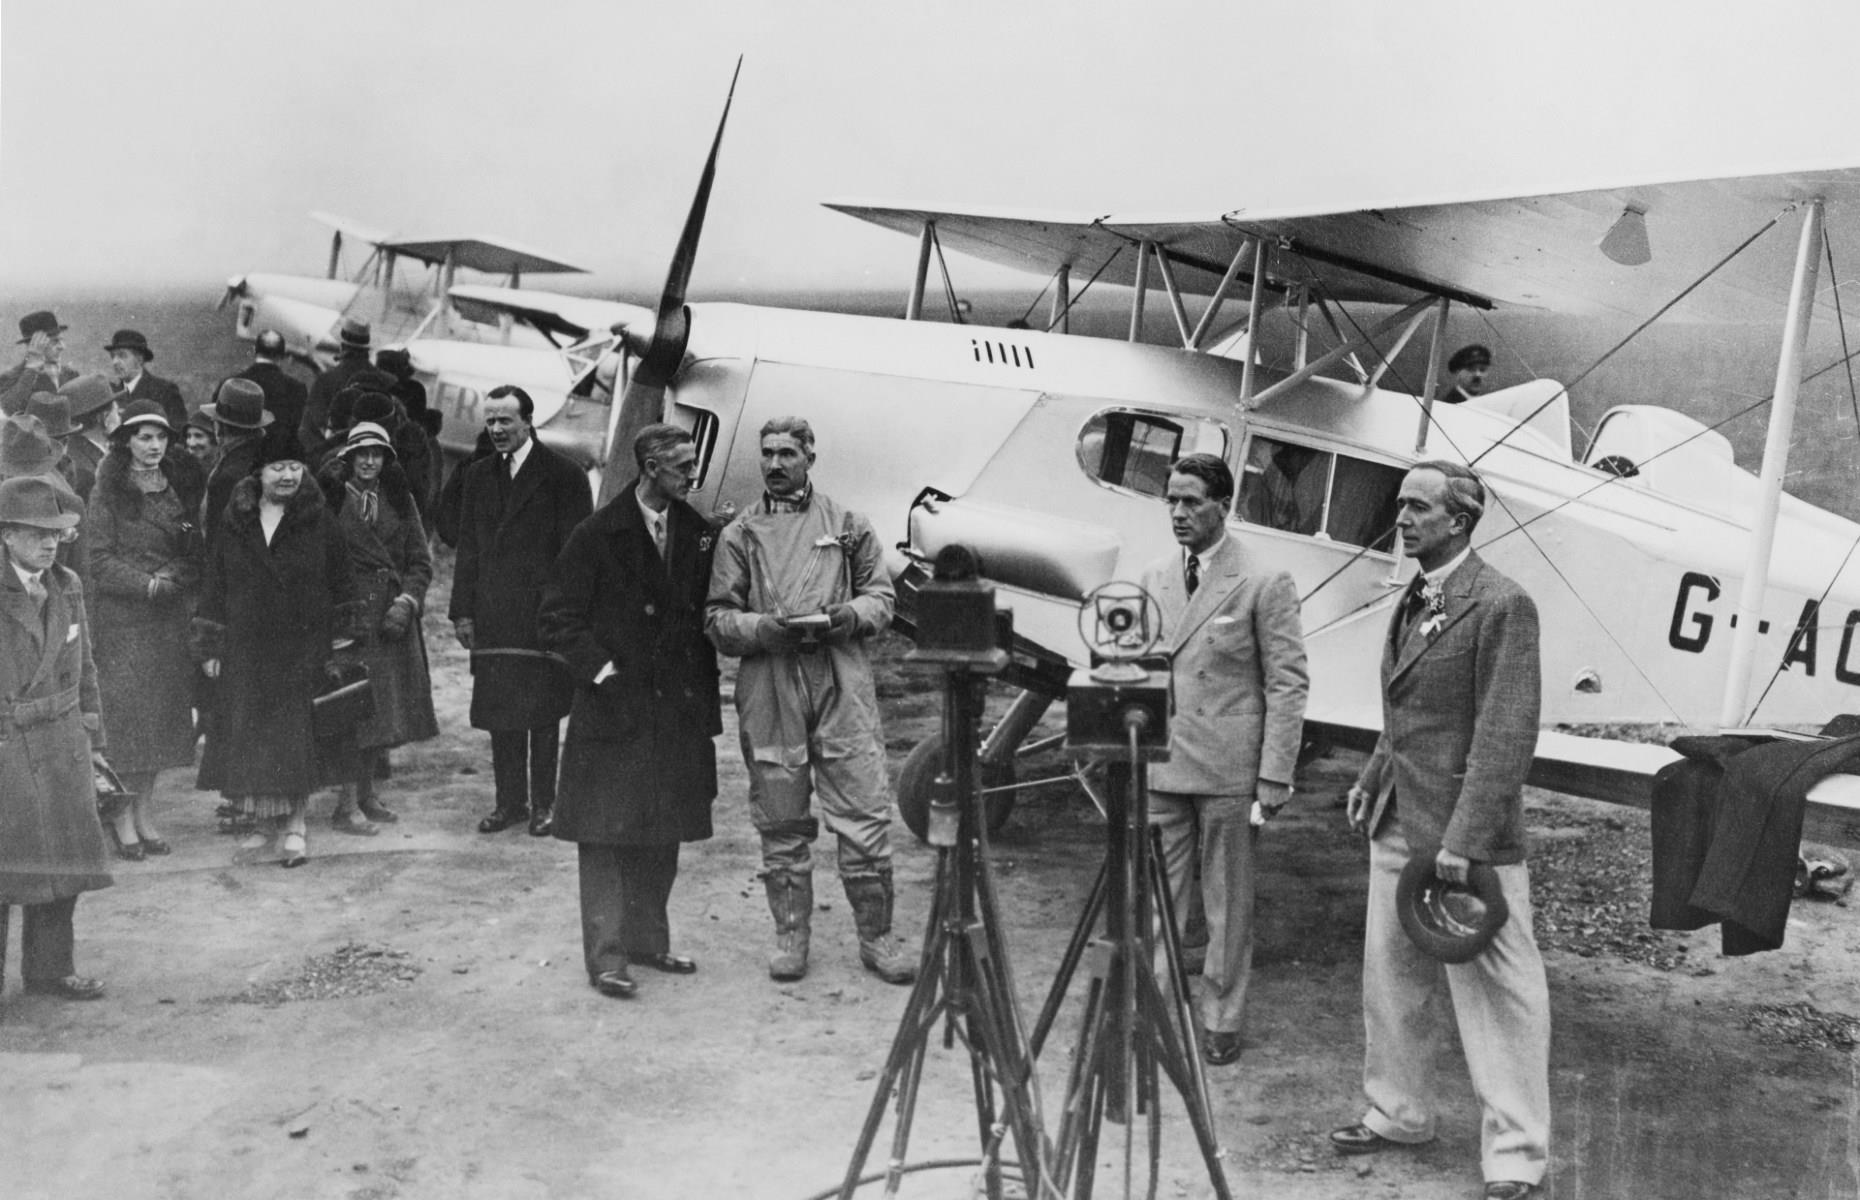 <p>By 1933, several further unsuccessful attempts had been made to climb Everest. But two Scottish pilots, Lieutenant David McIntyre and Sir Douglas Douglas-Hamilton, made history on 3 April that year when they were the first men to fly over the mystical mountain. <a href="https://www.bbc.co.uk/news/av/science-environment-40050594">Flying higher than anyone had before</a>, the two men captured important footage which was later <a href="https://www.theguardian.com/science/the-h-word/2013/apr/03/first-flight-over-everest-physiology">examined by Michael Ward</a>, mountaineer and doctor on the successful 1953 expedition. </p>  <p><a href="https://www.loveexploring.com/galleries/67325/incredible-stories-of-intrepid-explorers-through-the-centuries?page=1"><strong>Discover the incredible stories of intrepid explorers through the centuries</strong></a></p>